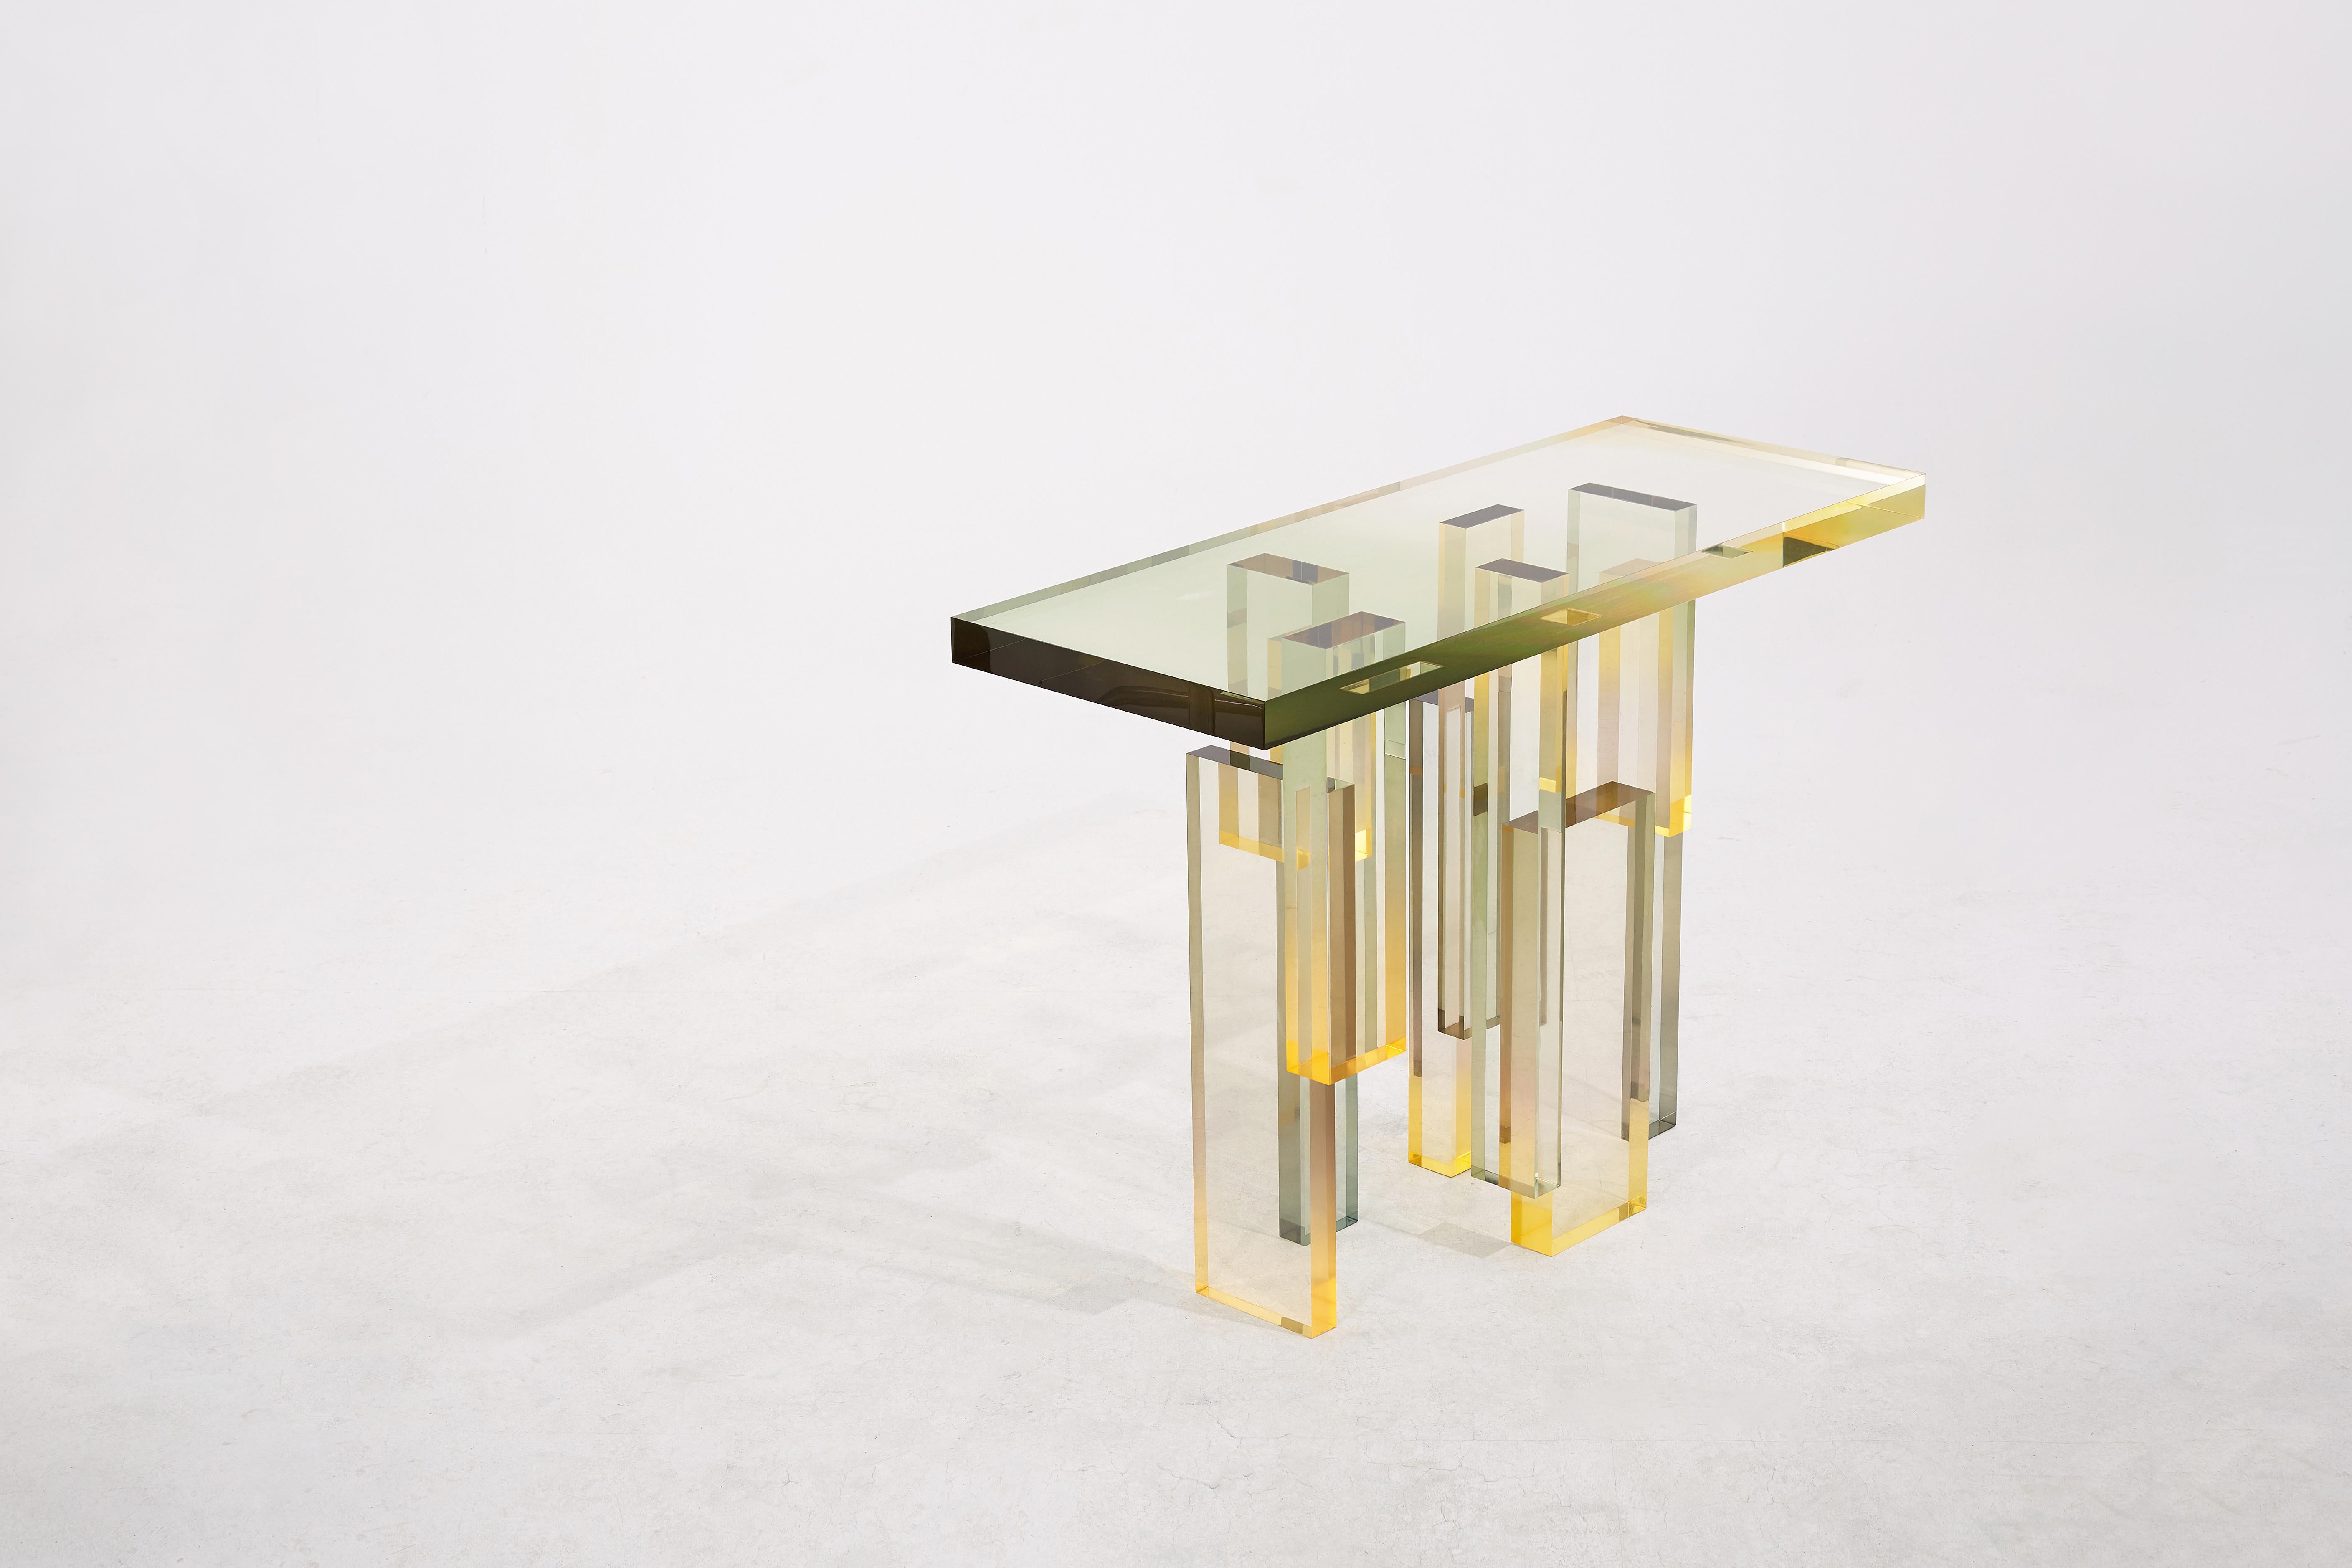 Console Table 02 by Saerom Yoon
Limited Edition No. 04 of 8 + 2AP
Dimensions: D 43 x W 110 x H 80 cm.
Materials: Acrylic.

My oldest childhood memories go back to the time I spent in the Philippines with my parents. The green mountains, the emerald